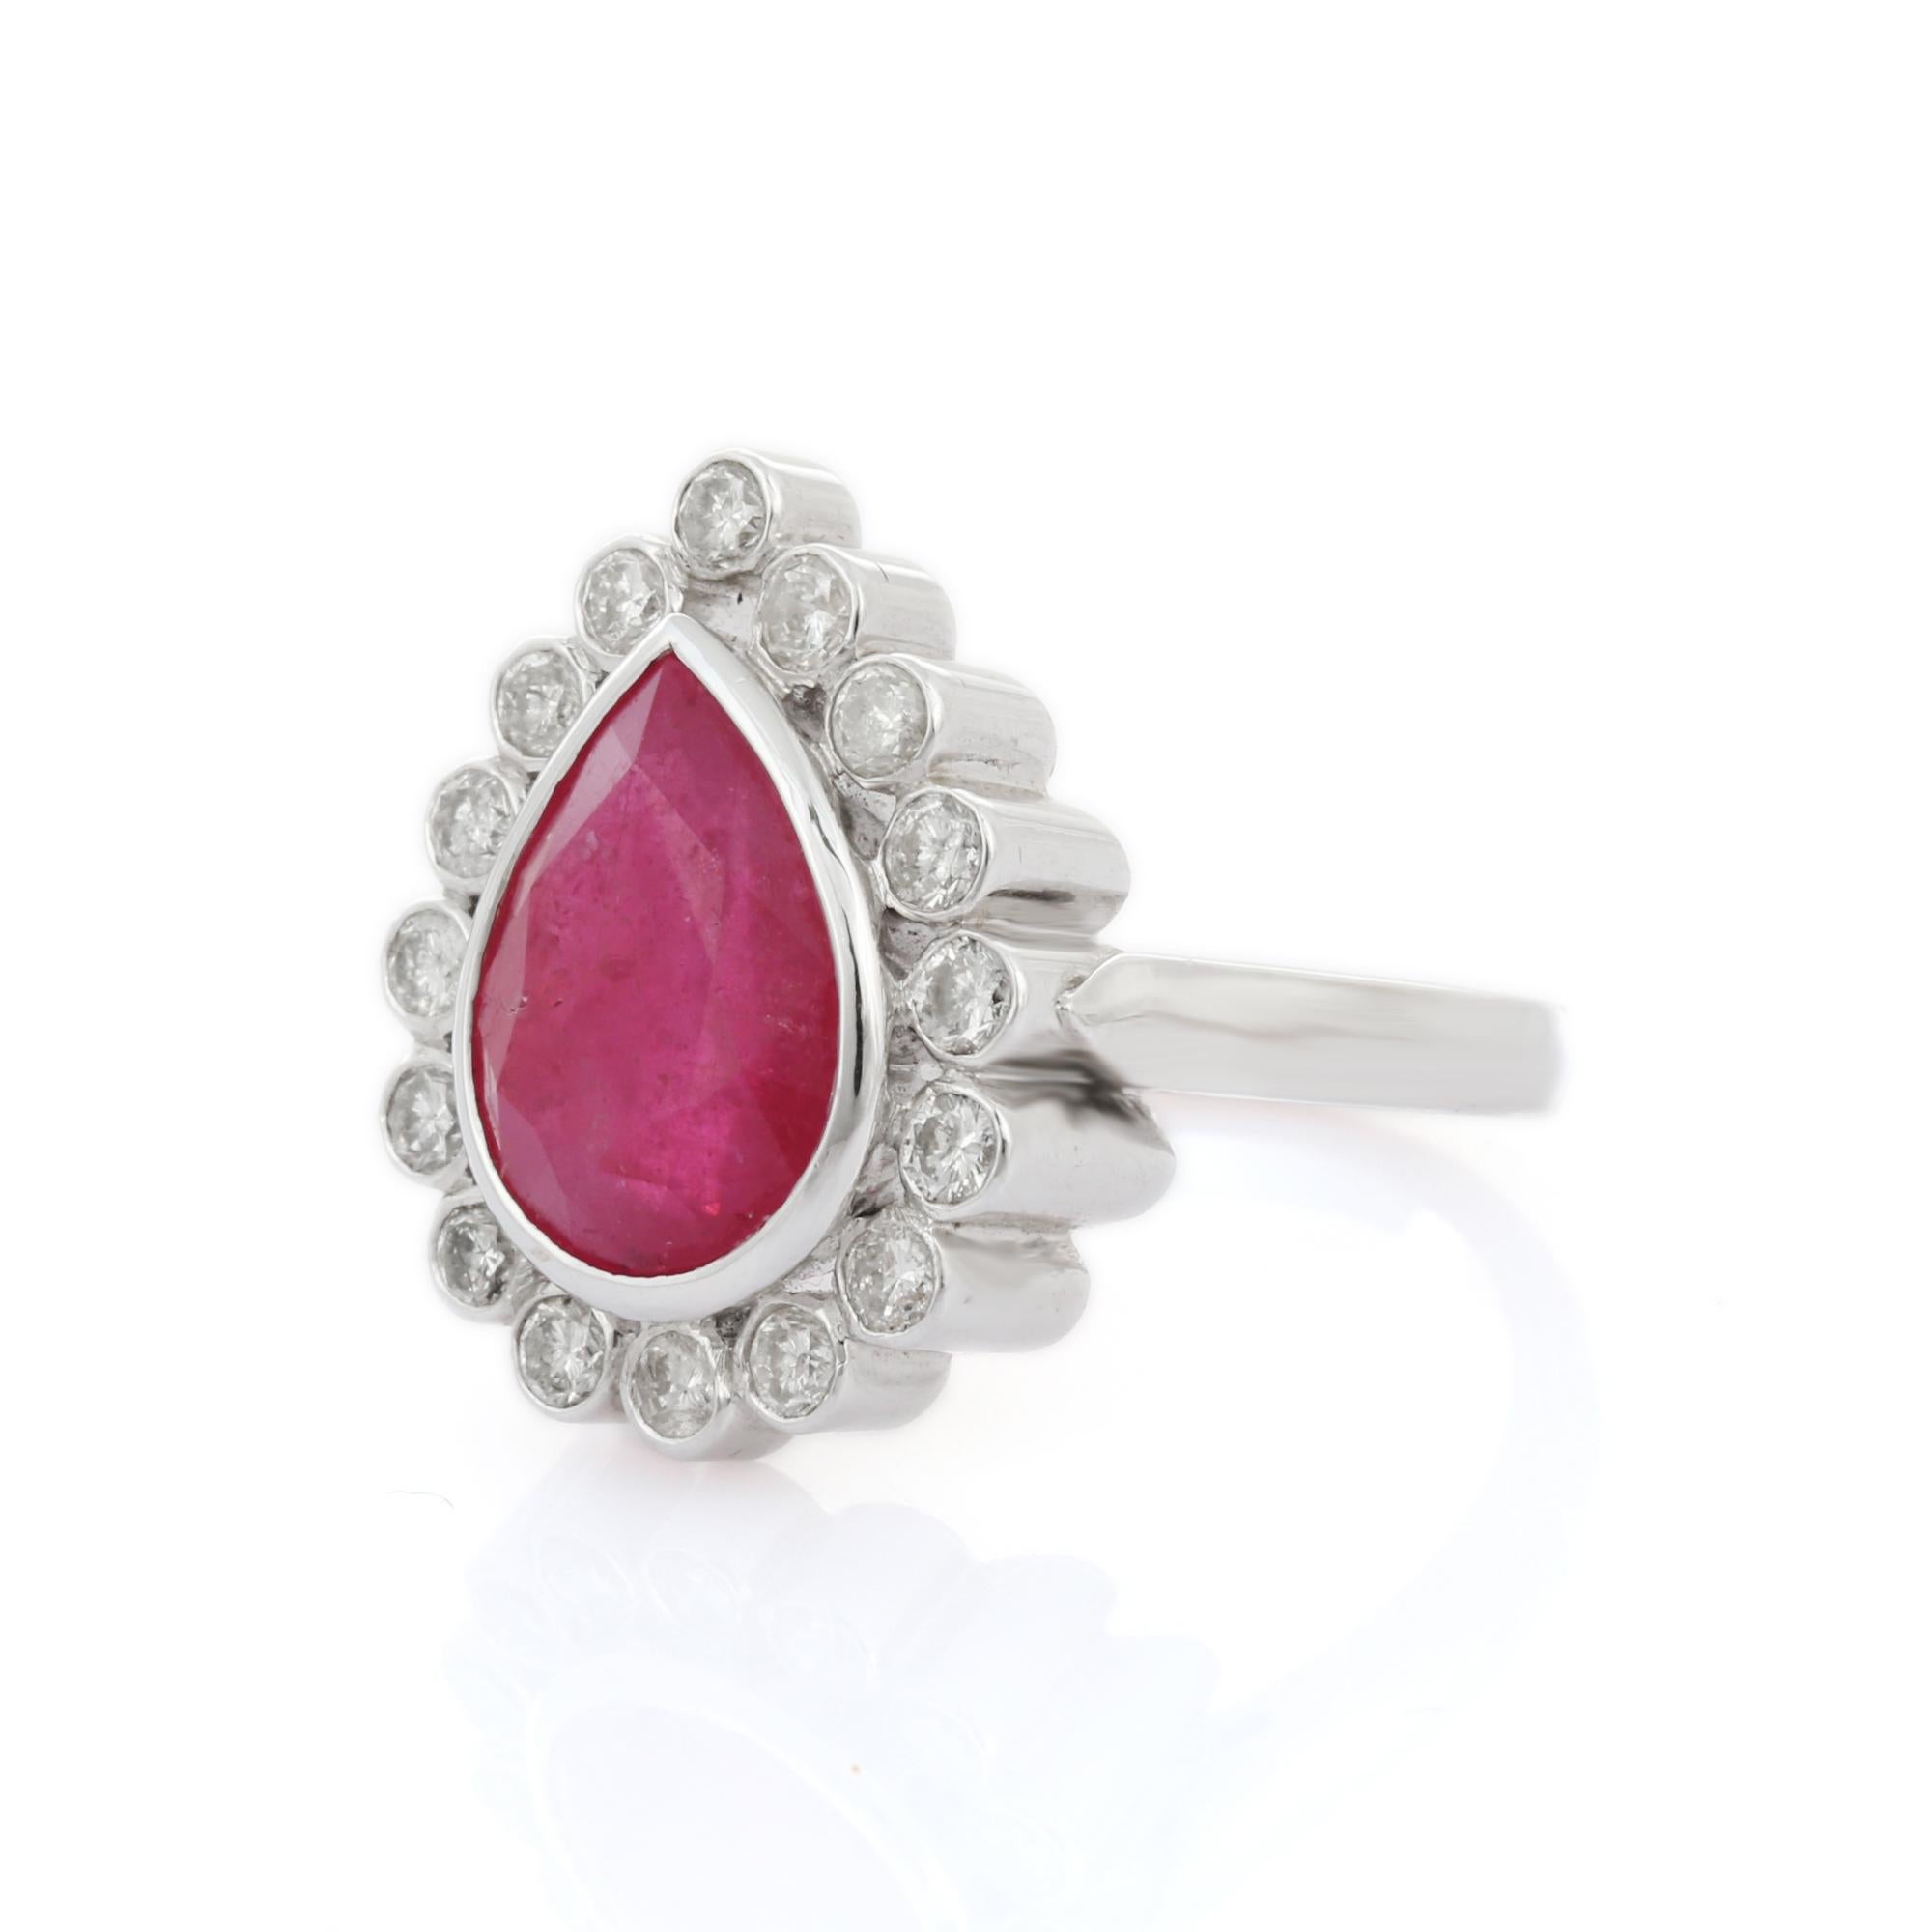 For Sale:  18K White Gold Pear Cut Ruby Cocktail Ring with Diamonds 3